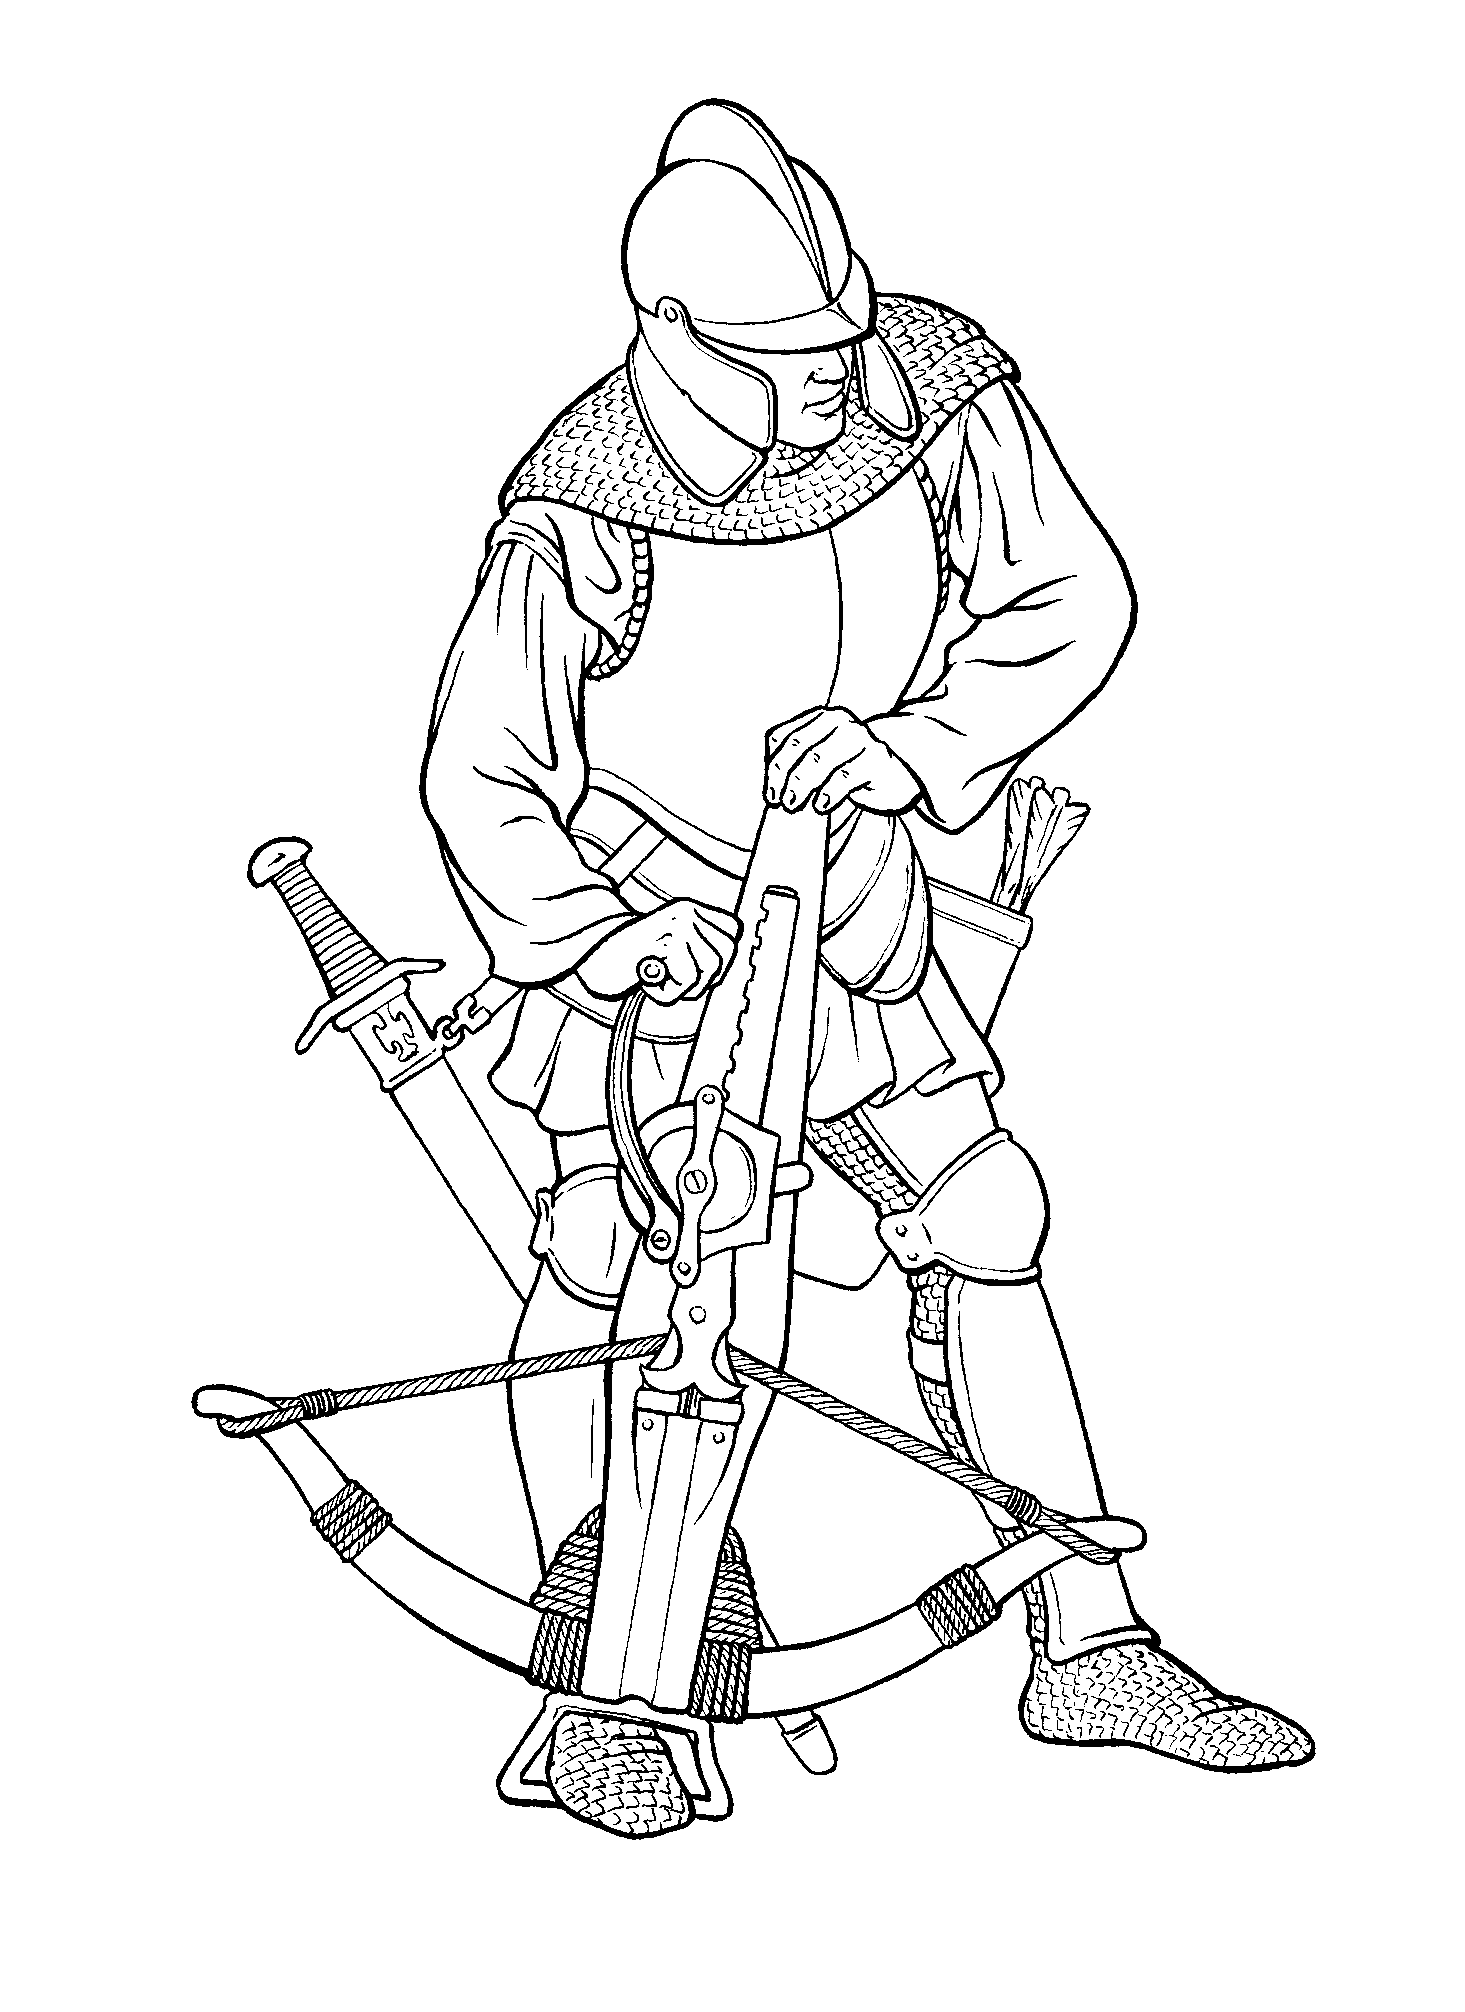 Download Coloring page - Warrior with a crossbow